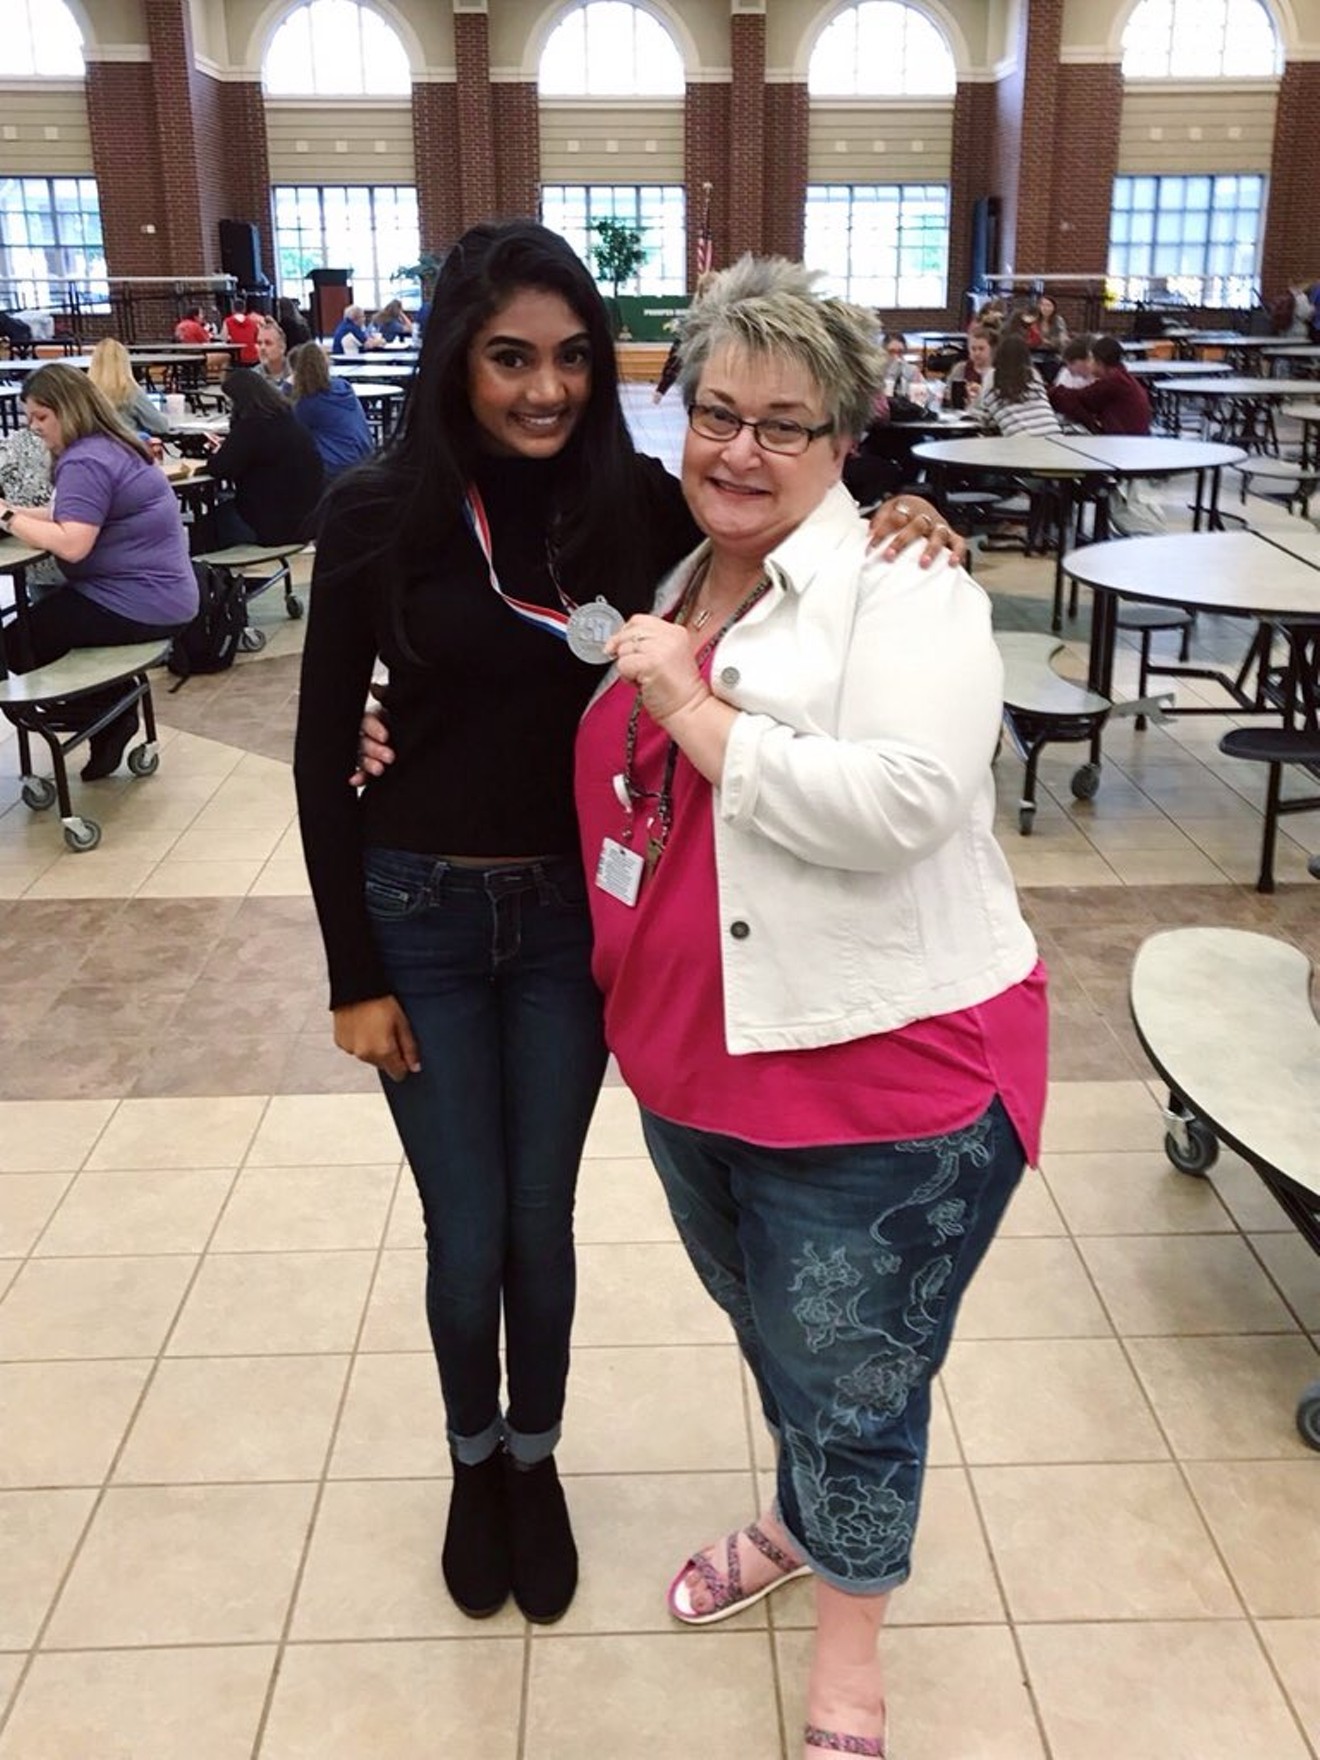 Prosper High School journalism instructor Lori Oglesbee-Petter shows off the University Interscholastic League regional competition medal won by Neha Madhira, a senior at Prosper High School and editor-in-chief of the Eagle Nation Online student news website.